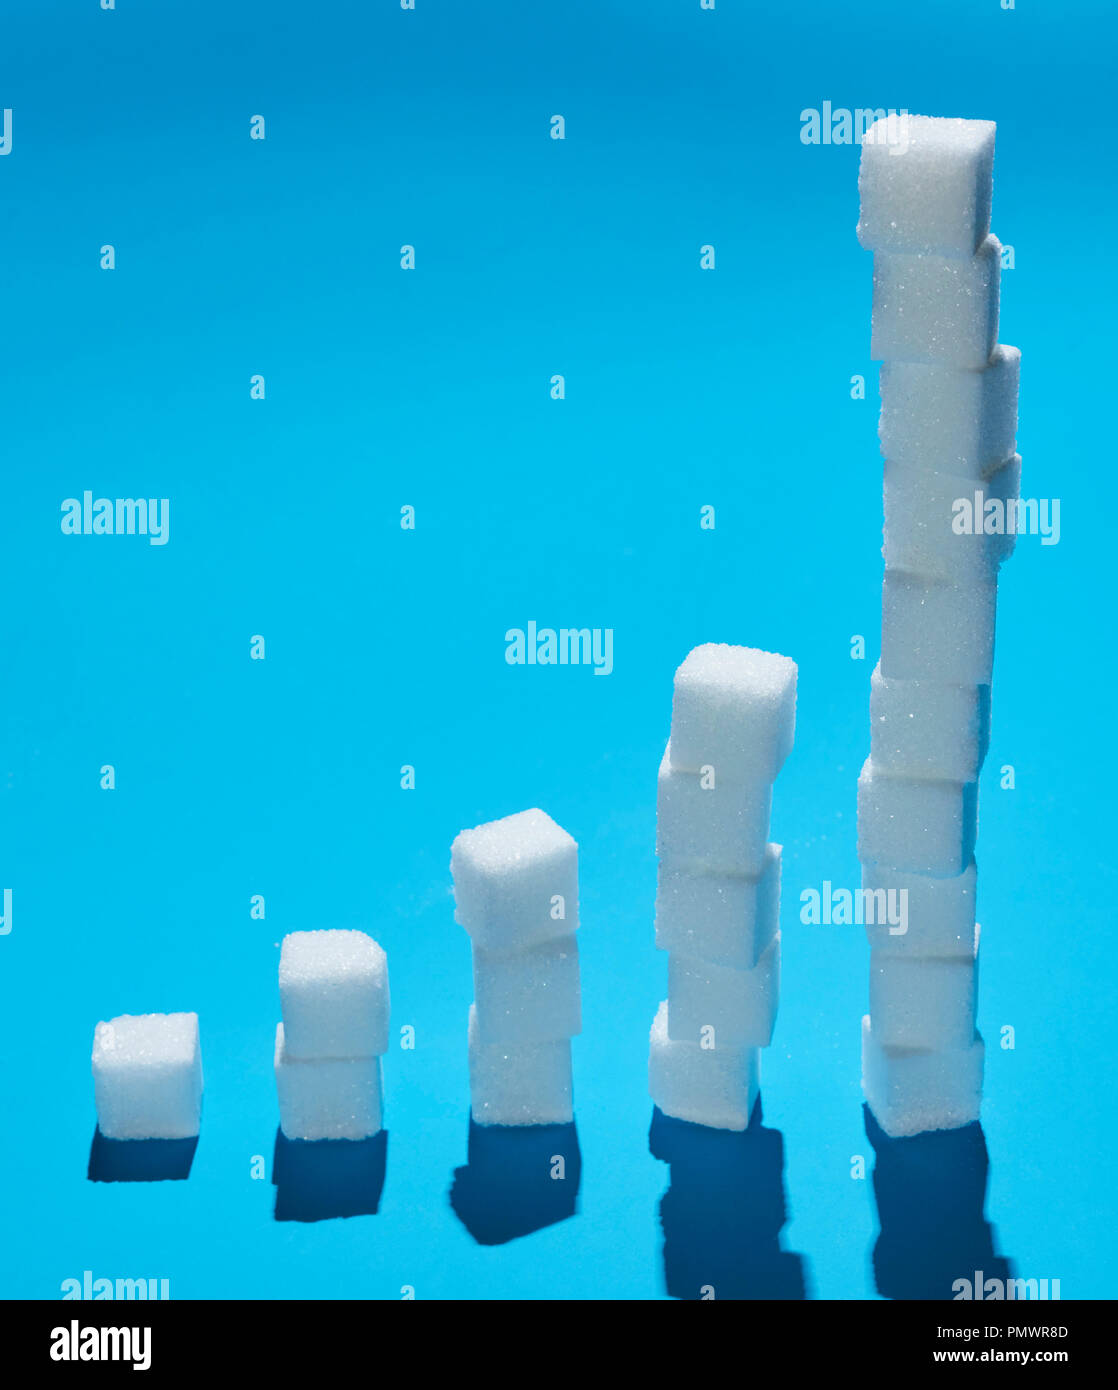 Sugar cubes forming ascending bar graph on blue background Stock Photo